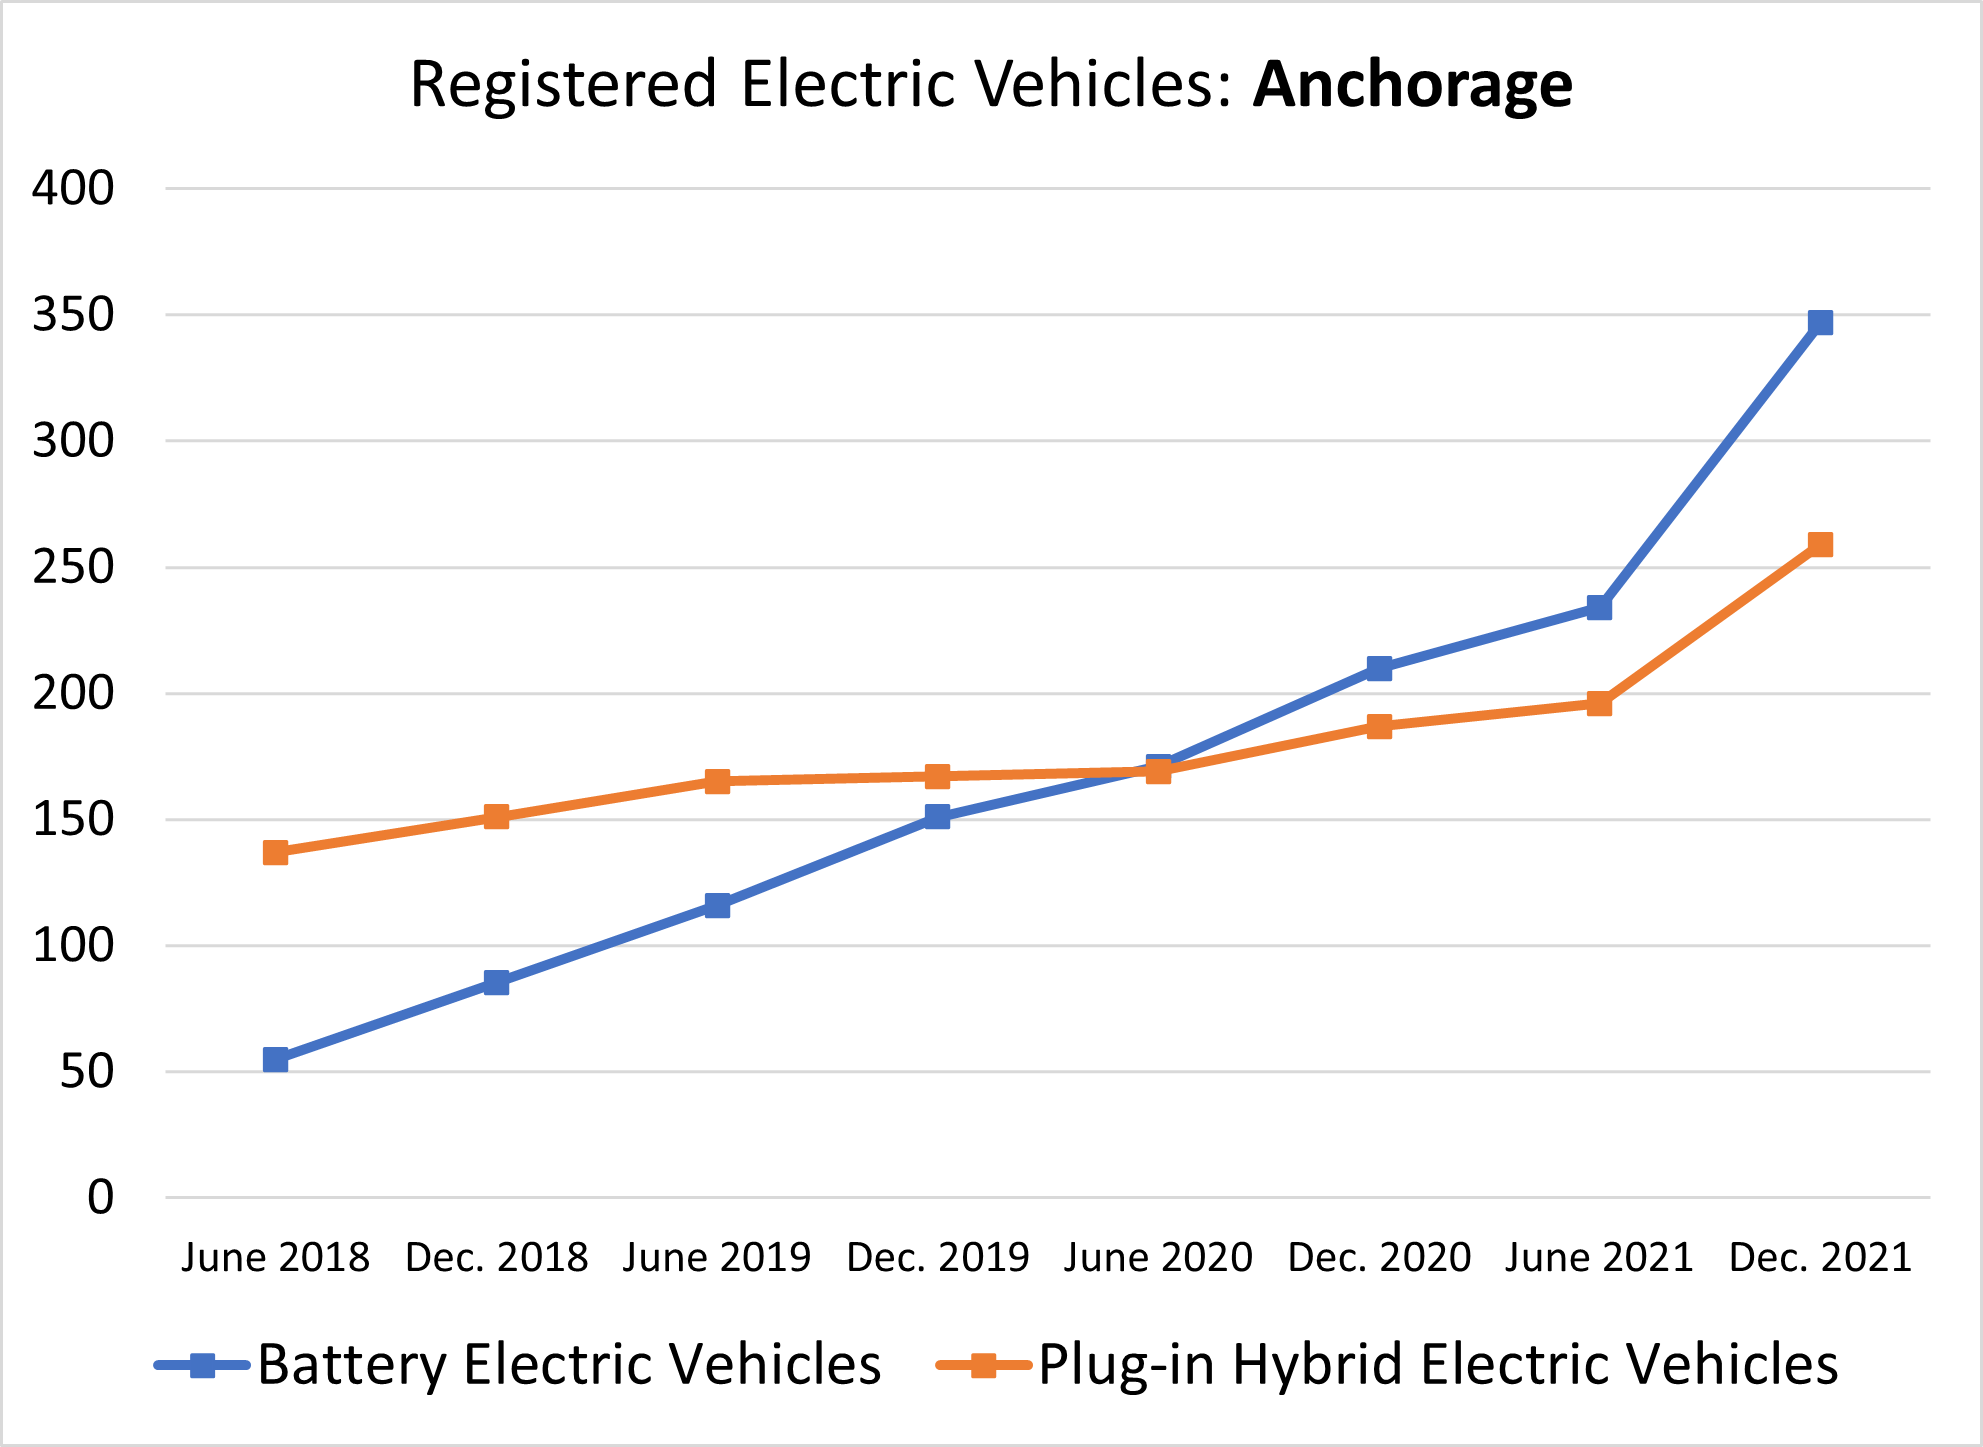 Registered Electric Vehicles in Municipality of Anchorage June 2018 to December 2021